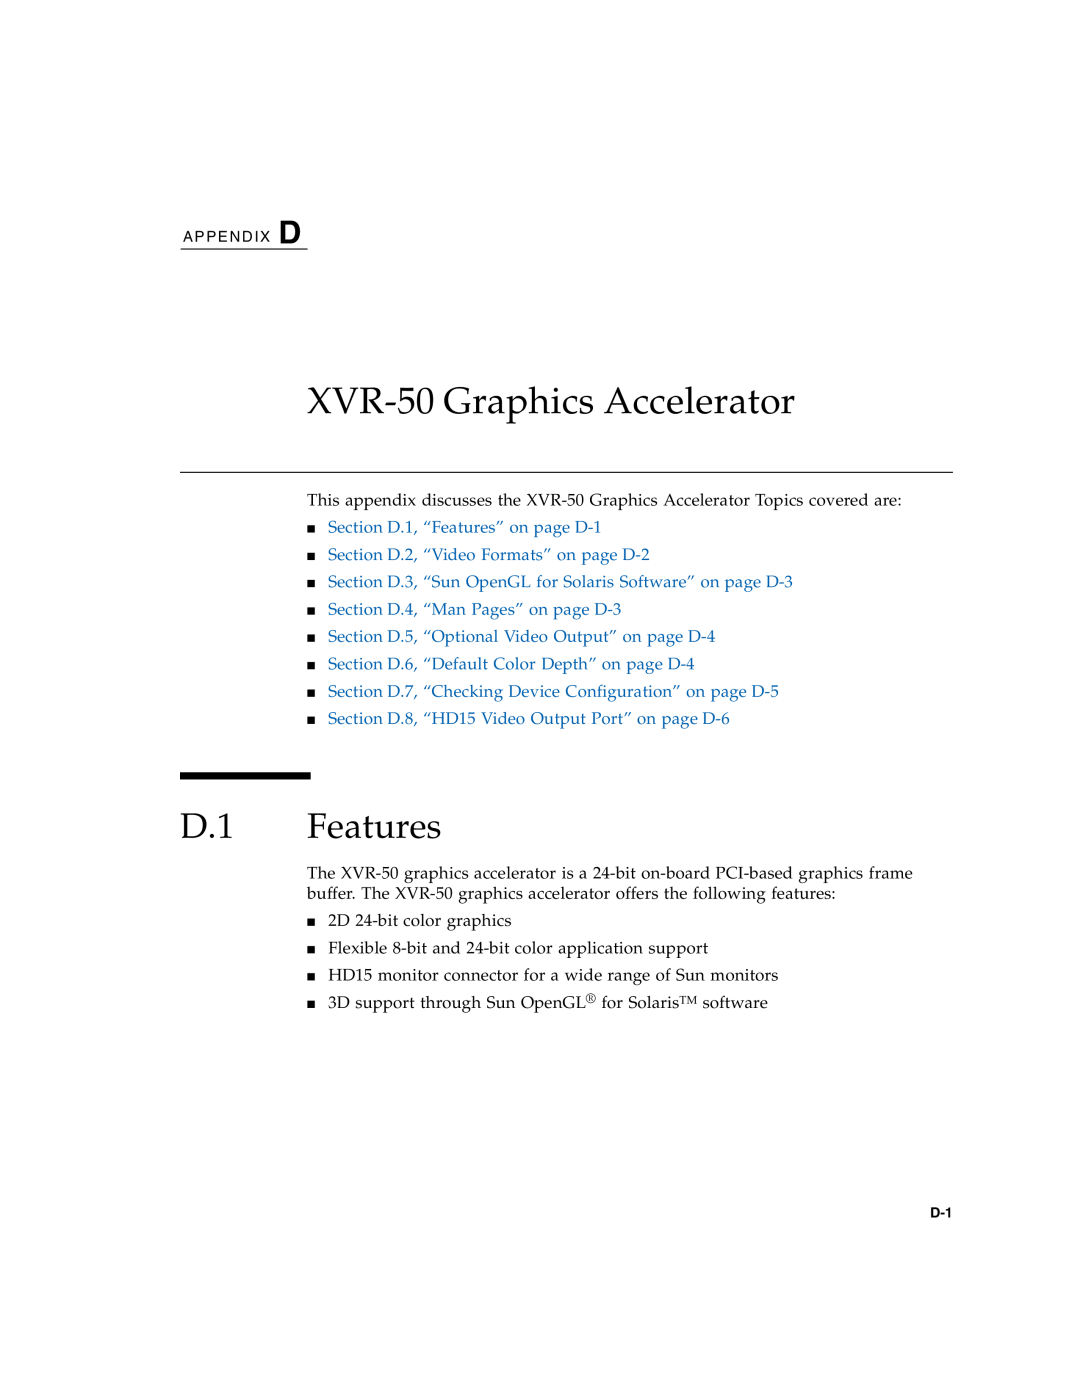 Sun Microsystems T6320 service manual XVR-50 Graphics Accelerator, D.1 Features, Section D.1, “Features” on page D-1 